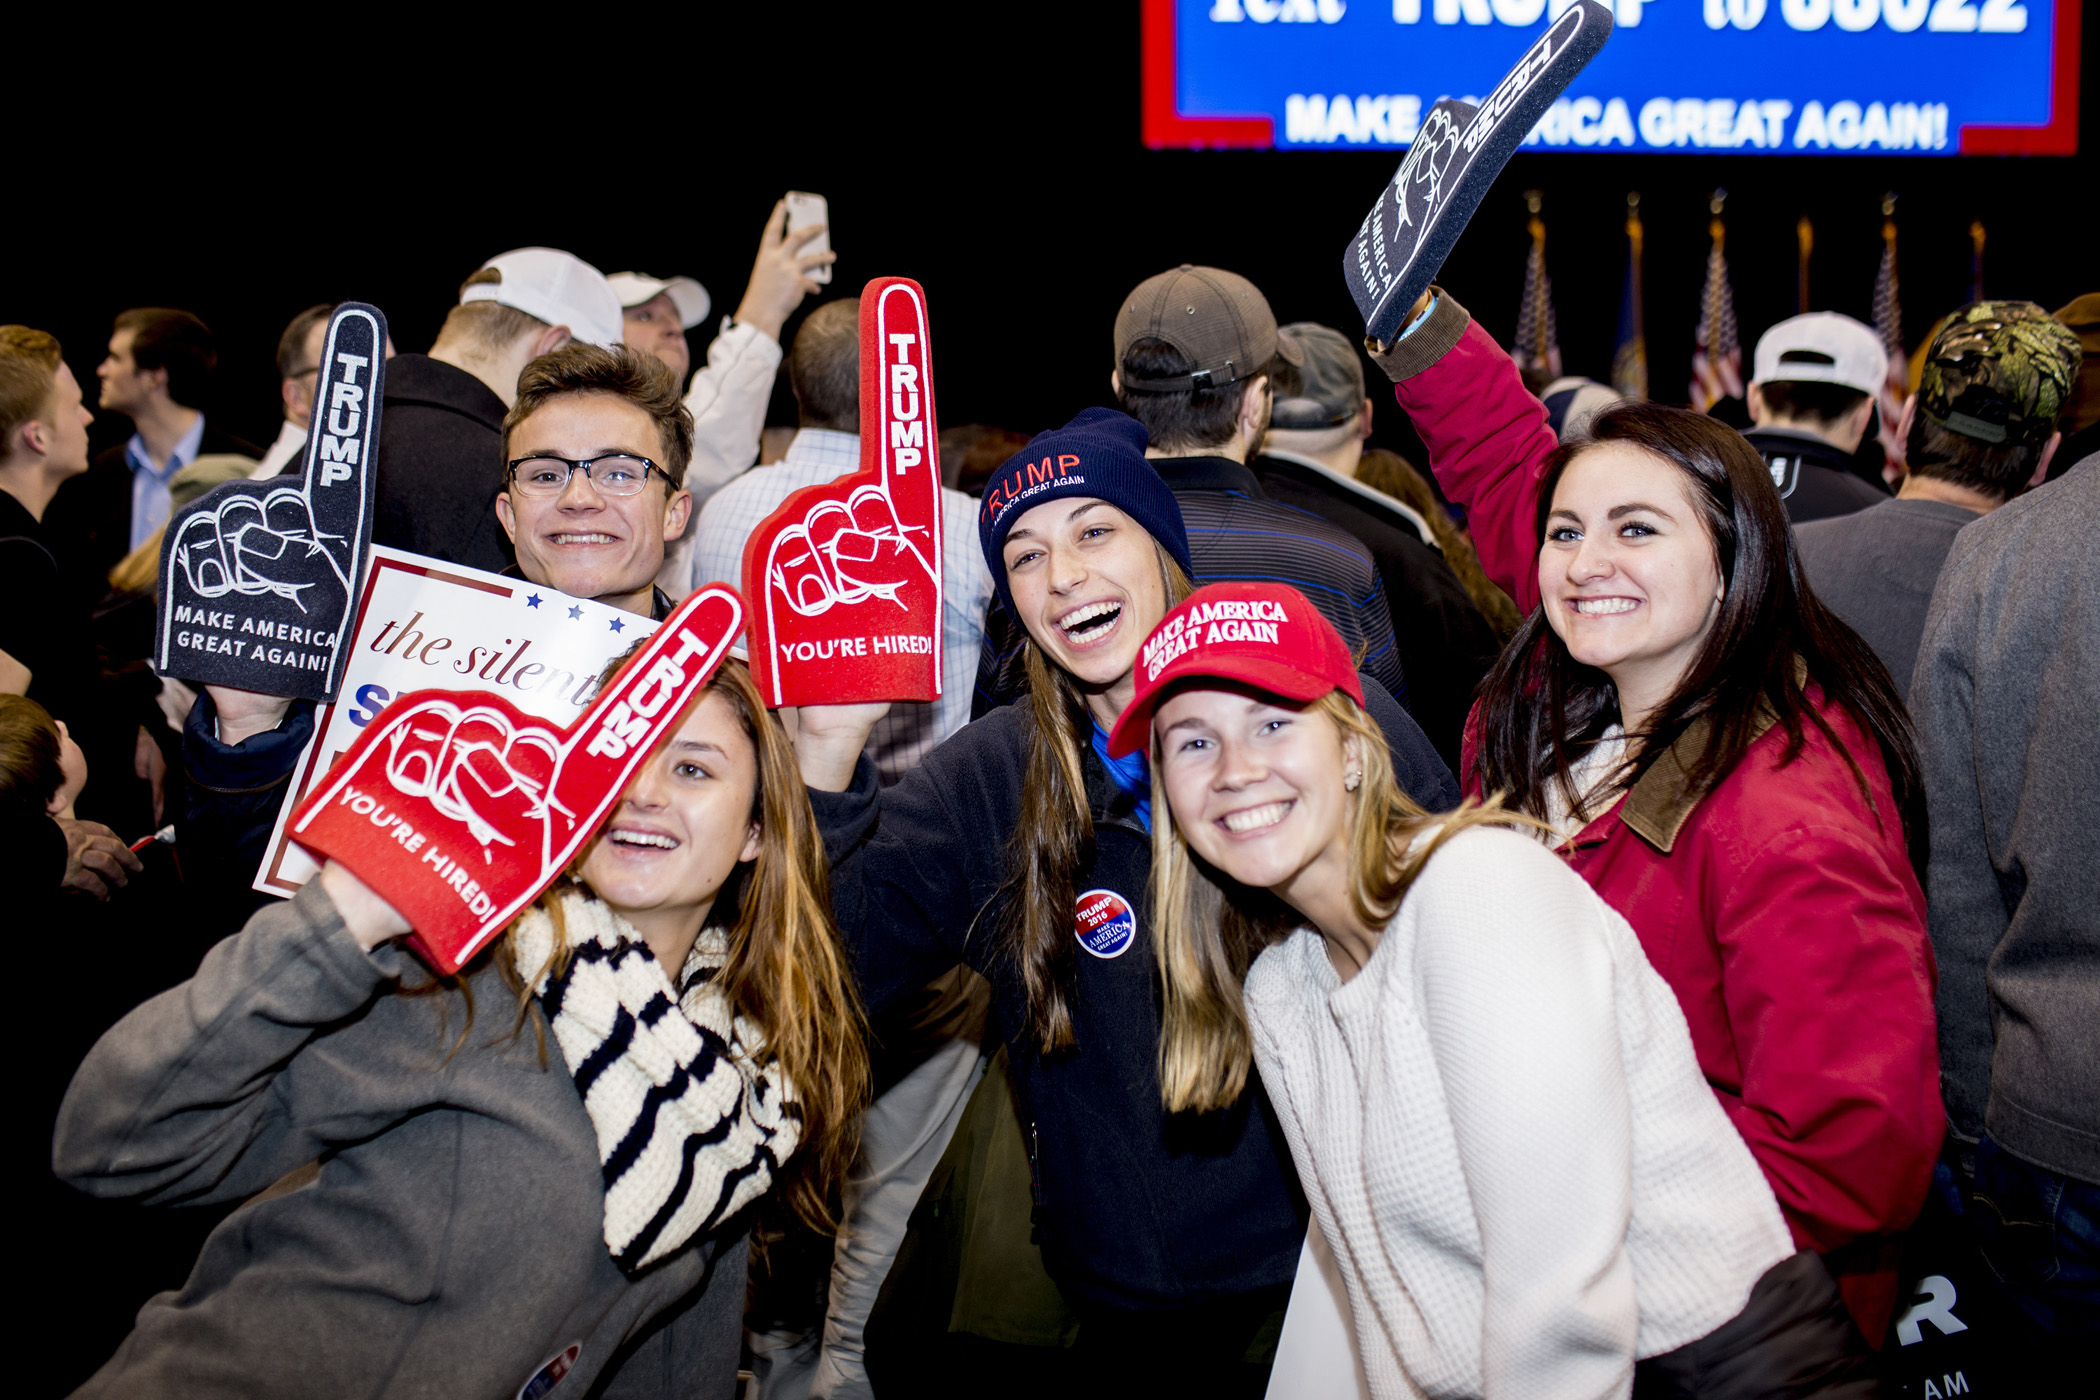 Supporters of Republican presidential candidate Donald Trump attend a rally at the the Verizon Arena on Feb. 9, 2016, in Manchester, N.H.